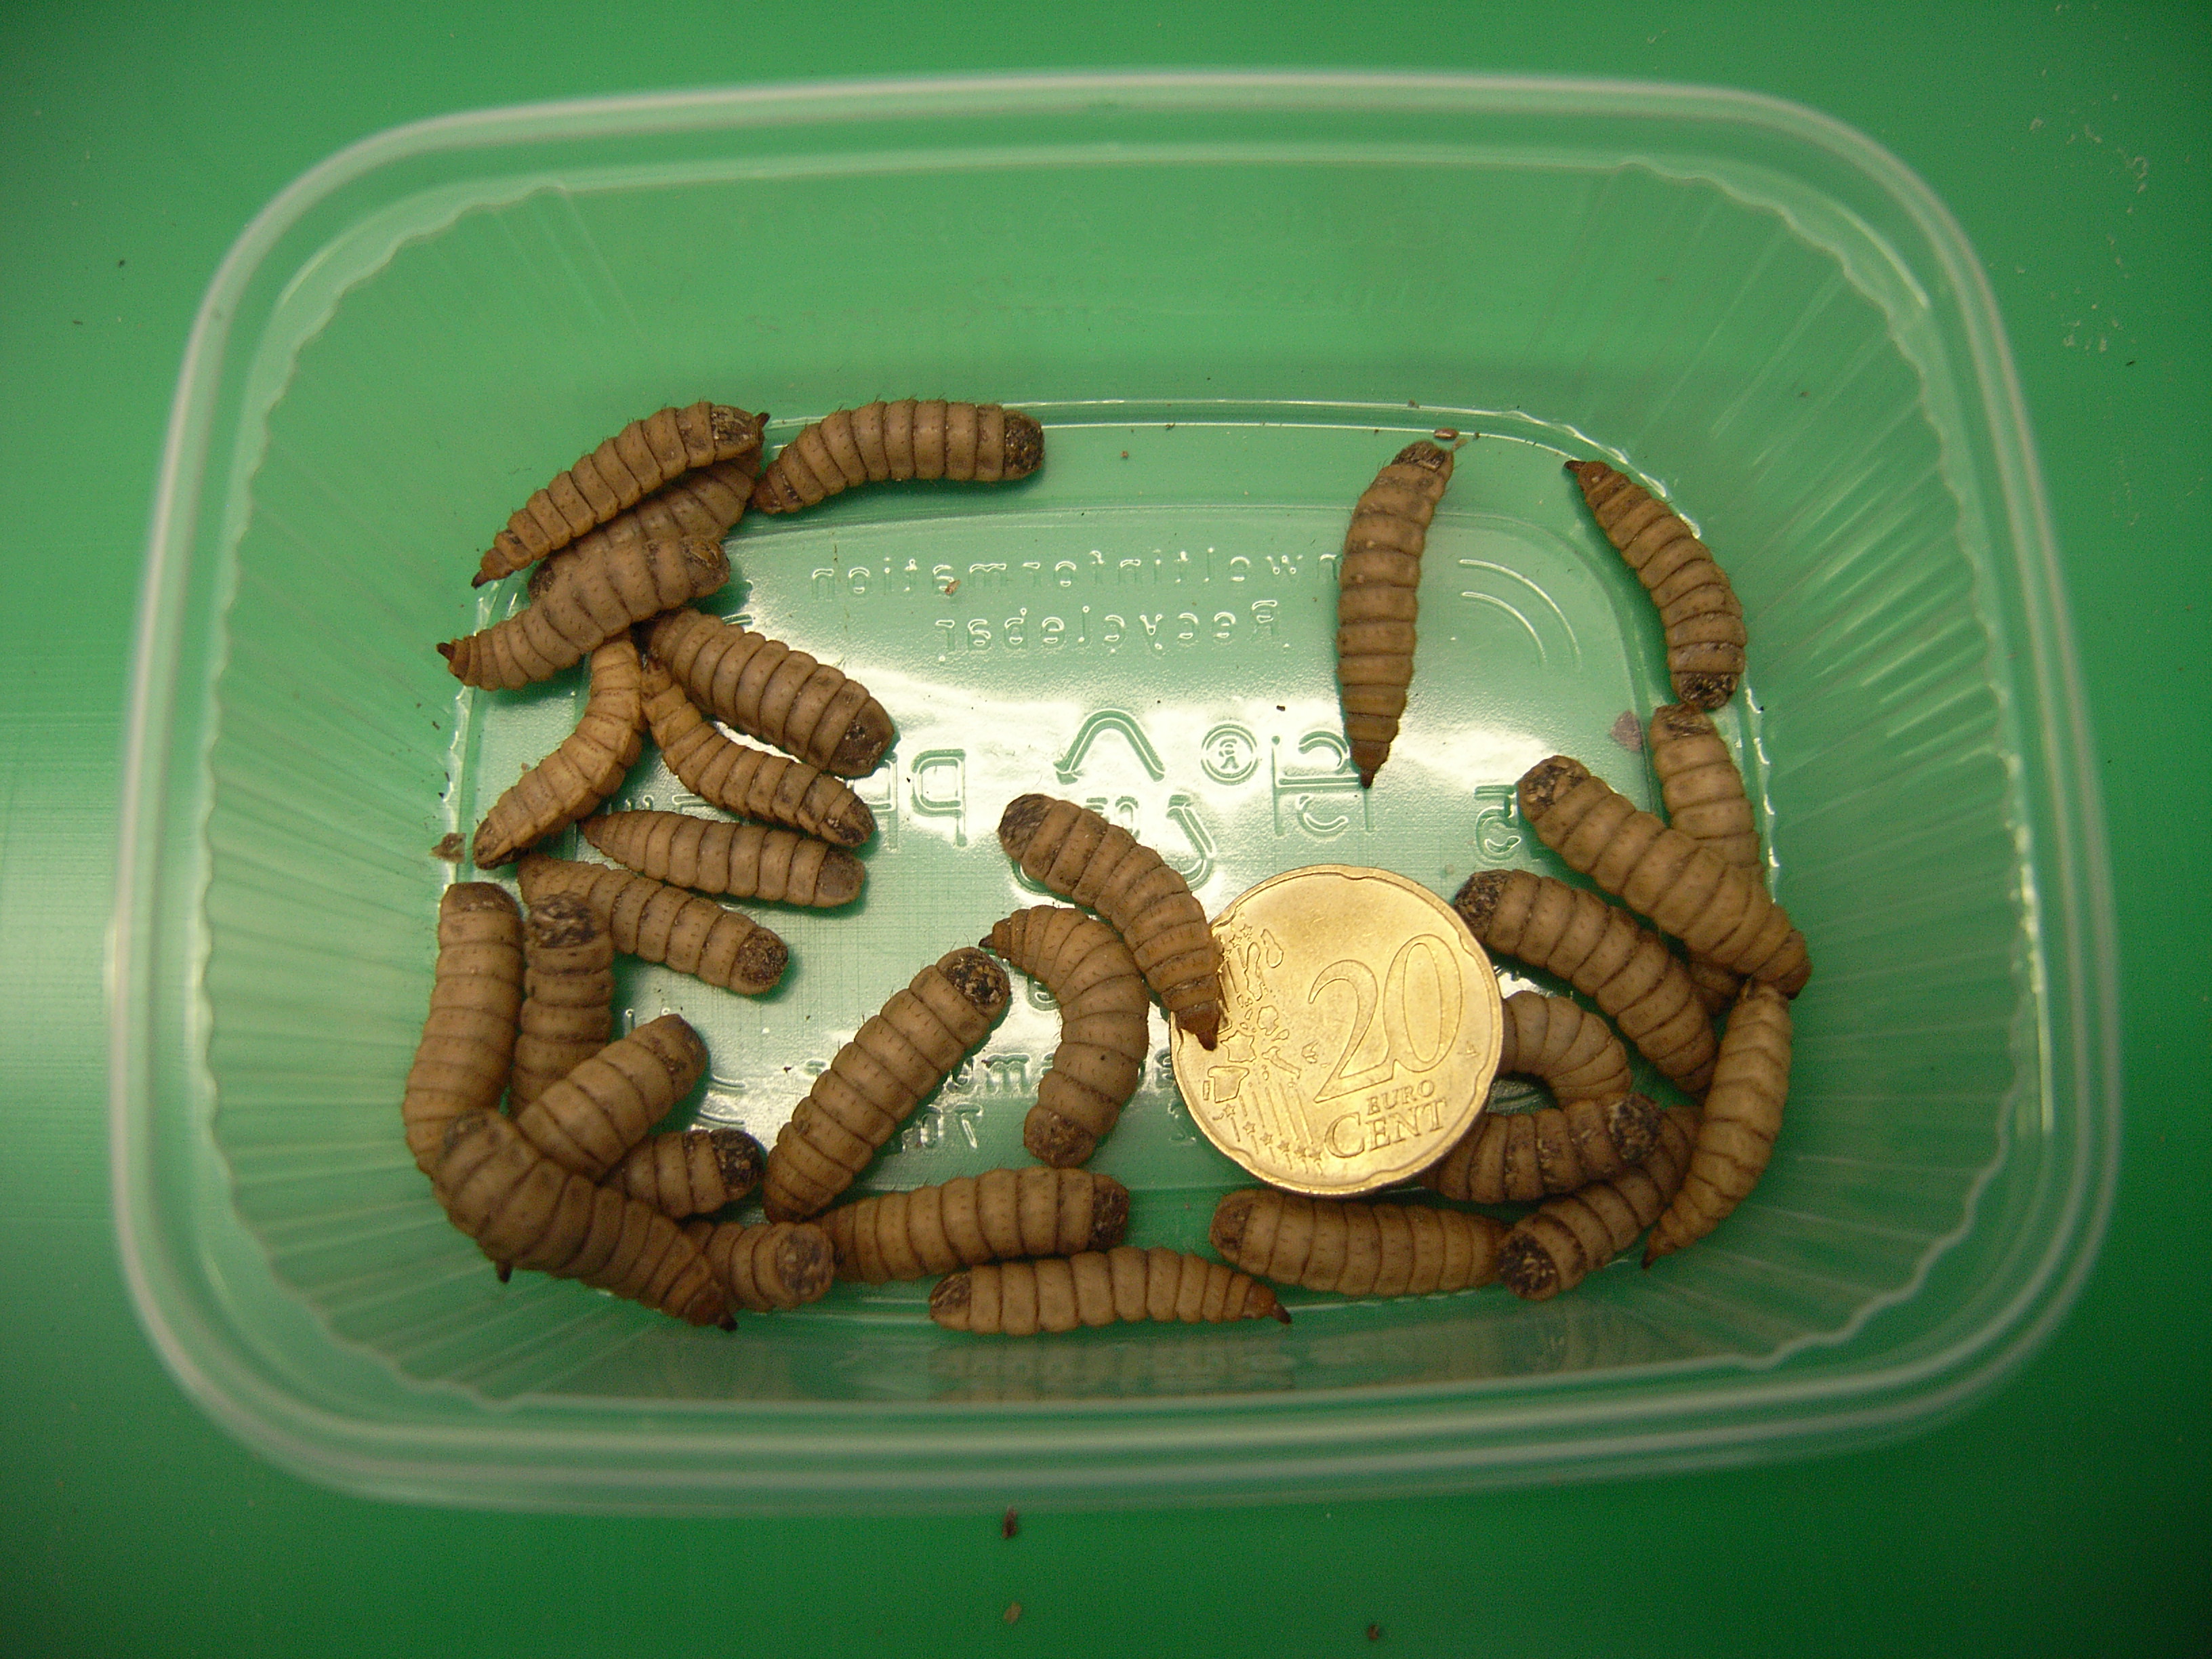 Some fly larvae, compared to a 20-cent piece, in a plastic dish.